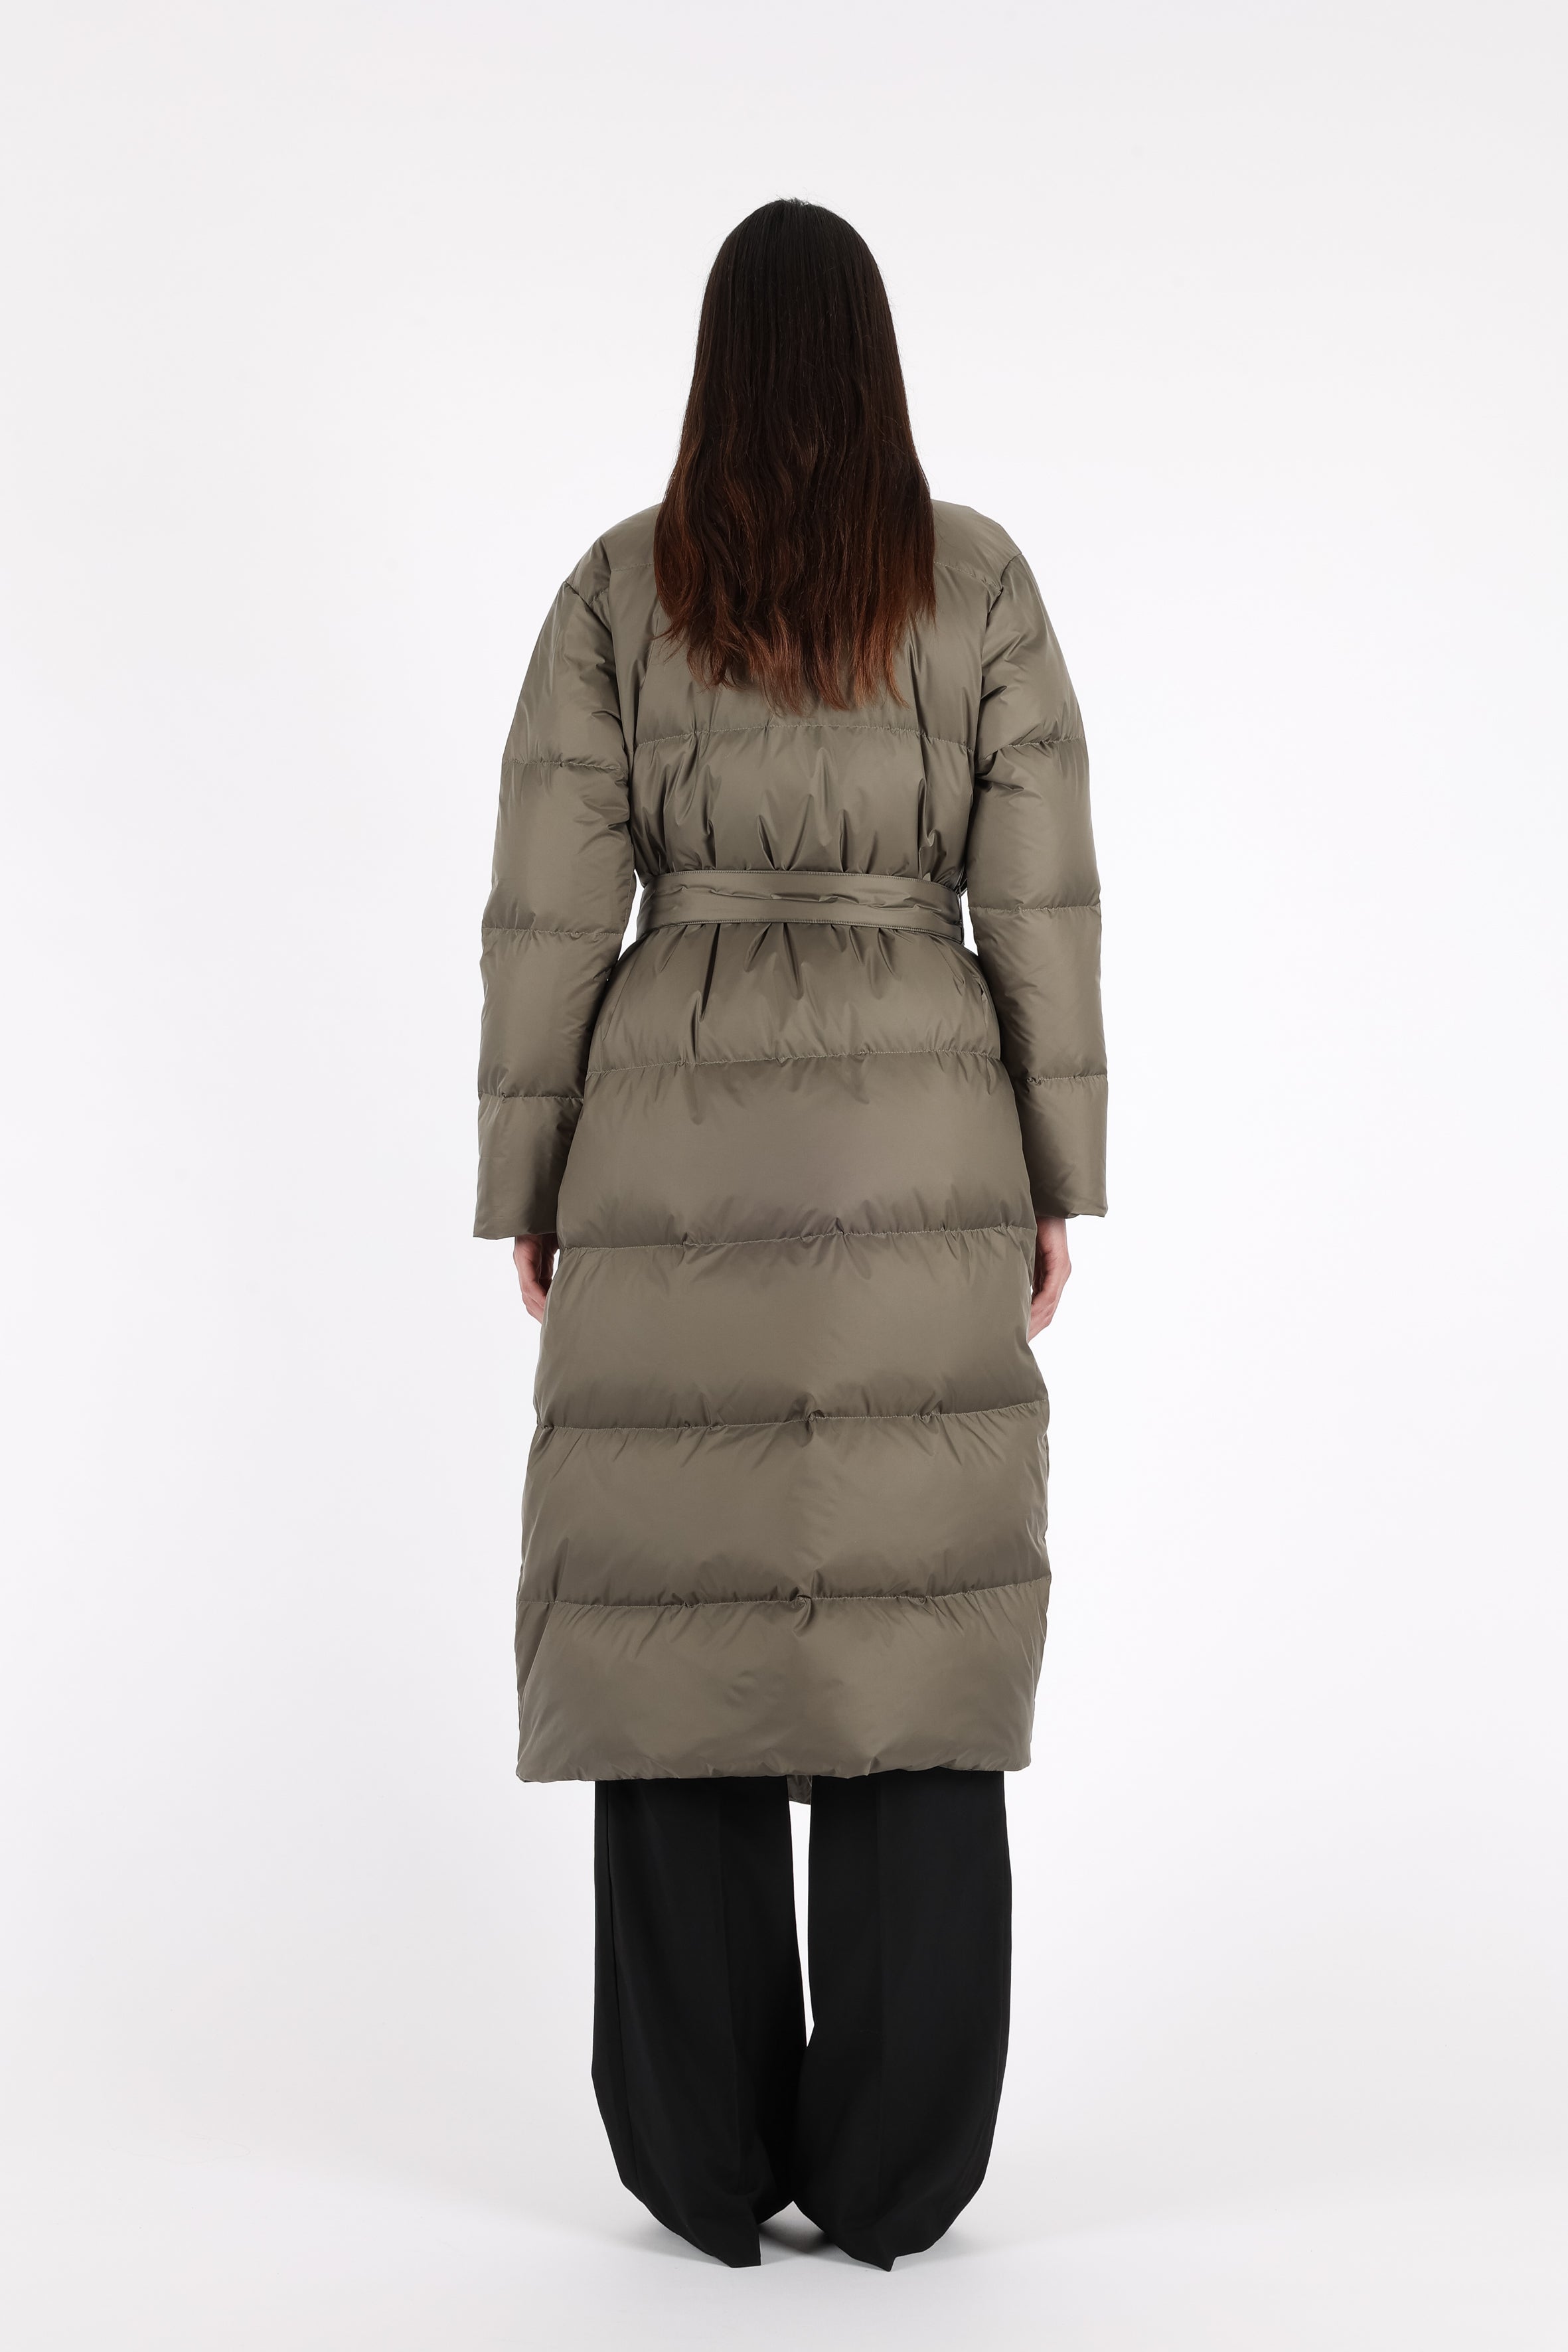 Long belted Lempelius Downcoat in the color olive